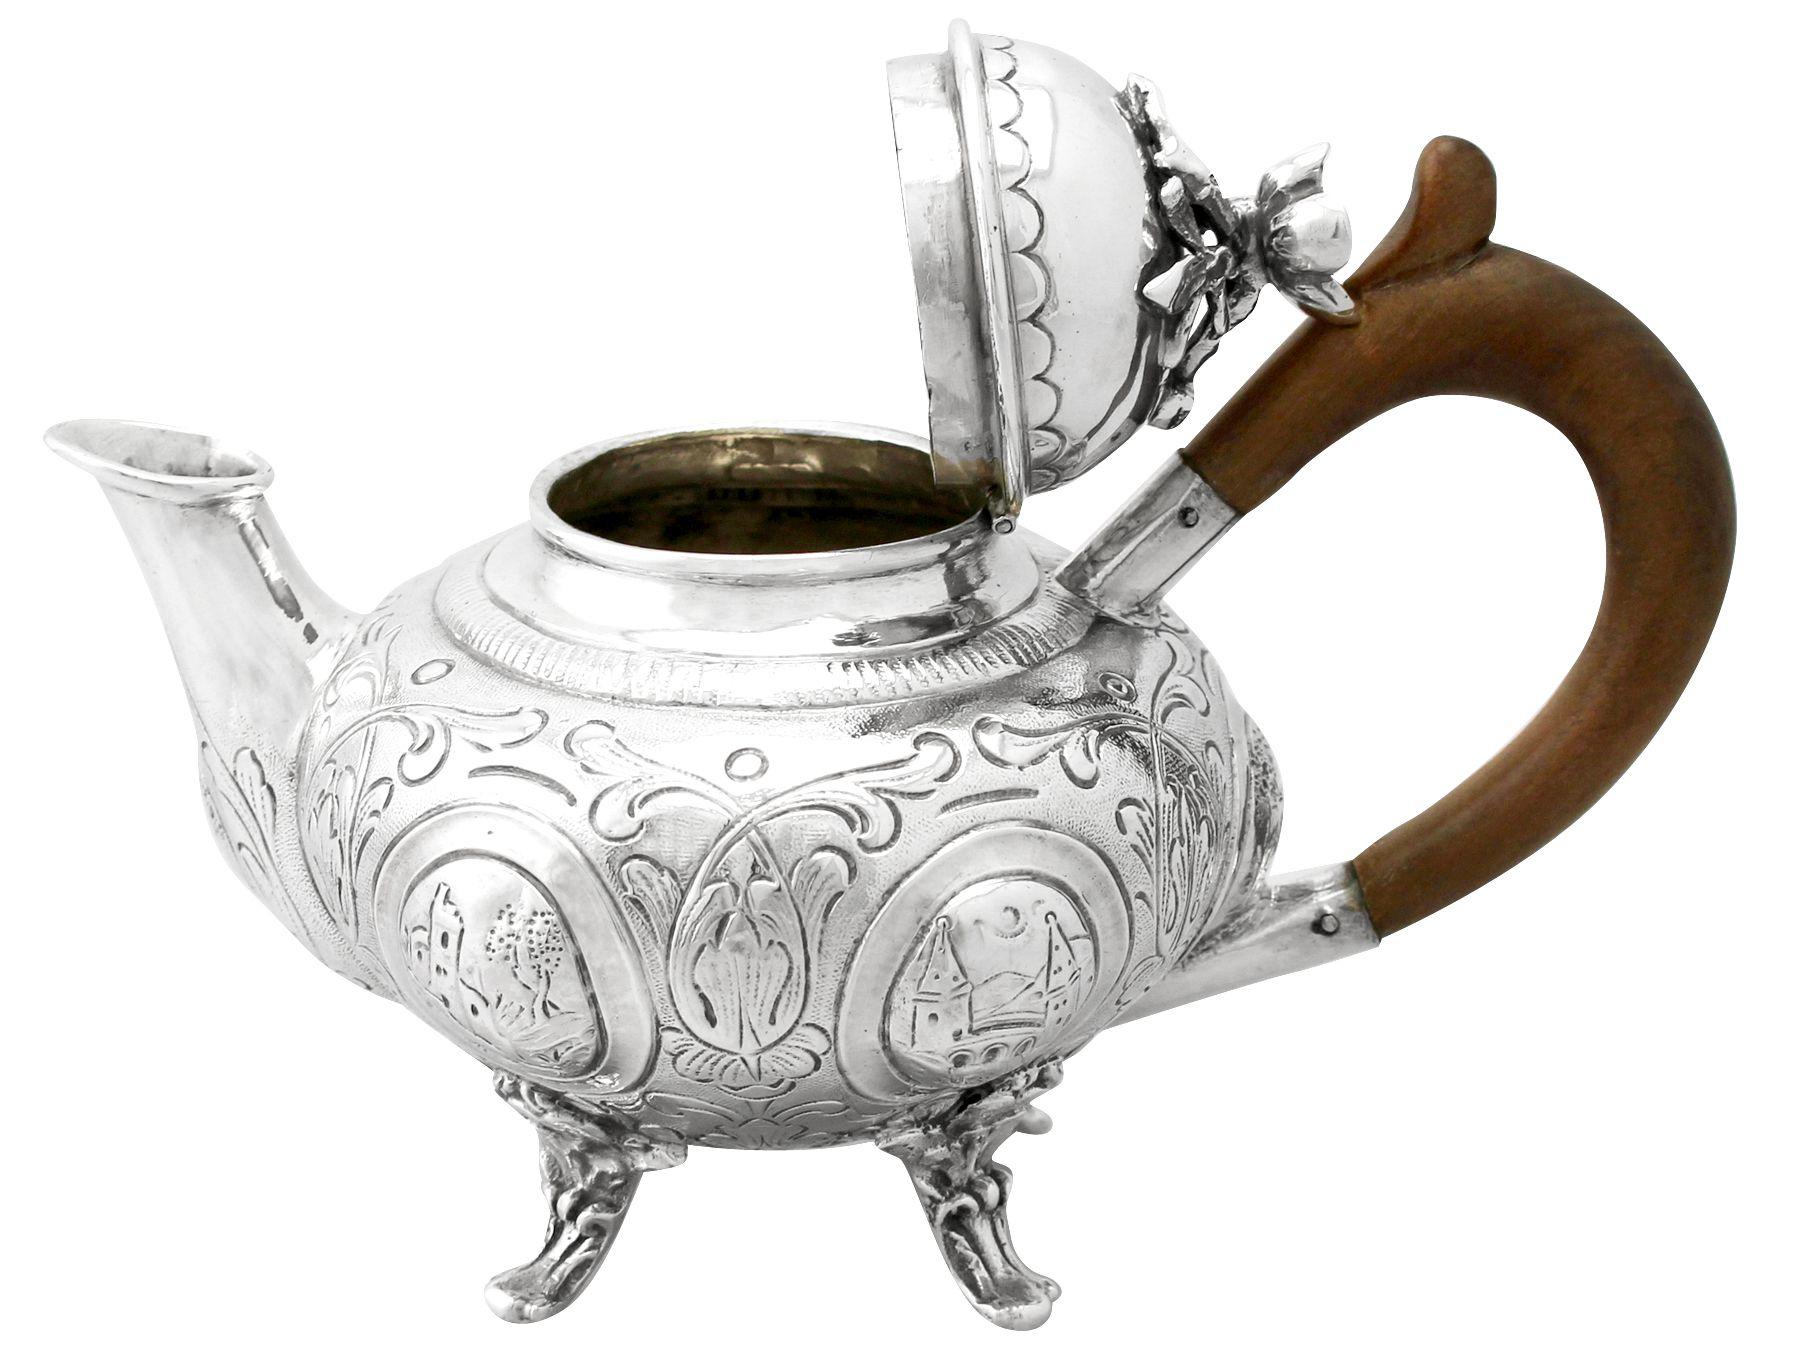 Antique Edwardian Dutch Sterling Silver Bachelor Teapot In Excellent Condition For Sale In Jesmond, Newcastle Upon Tyne